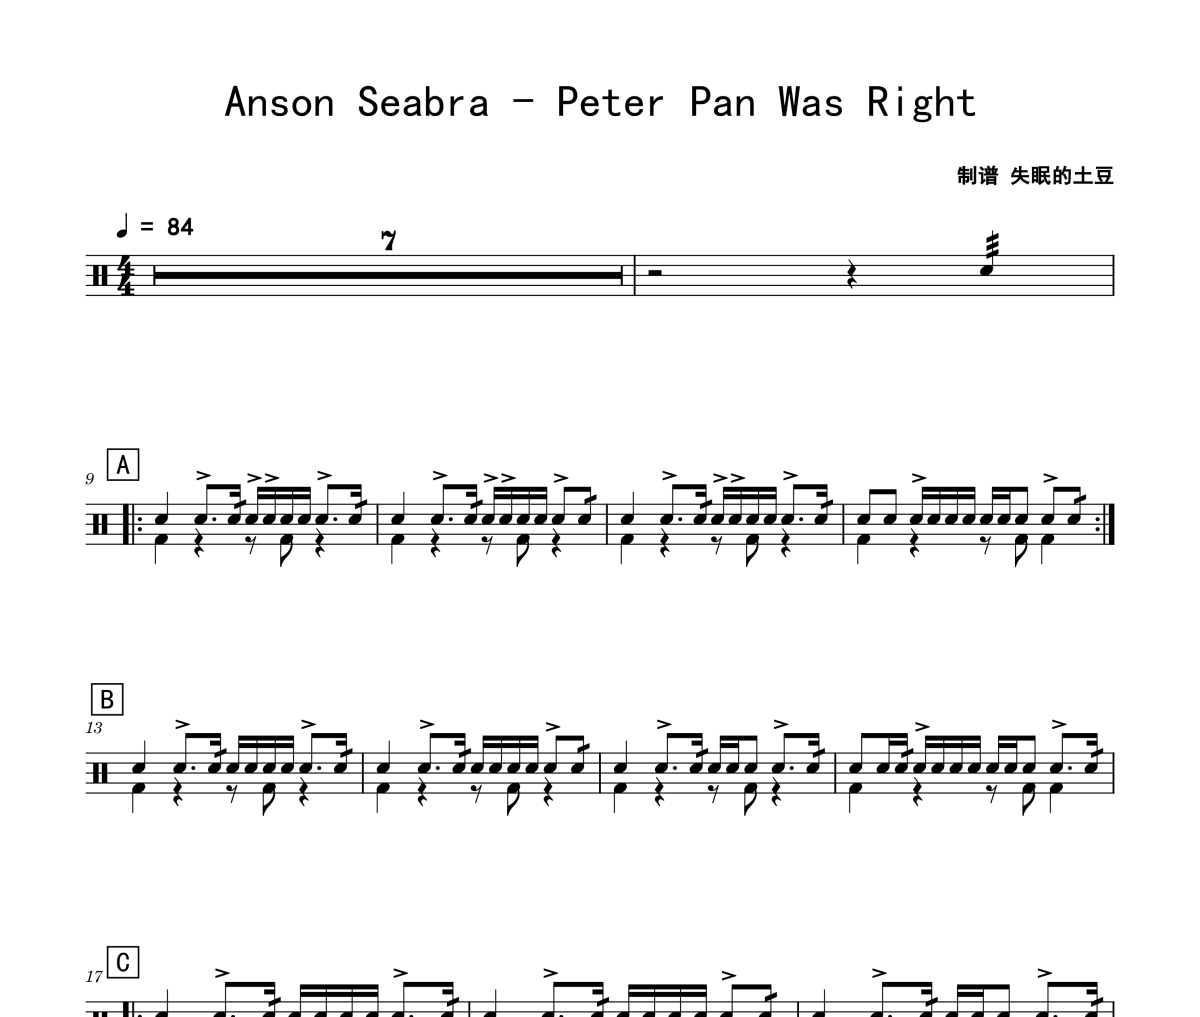 Peter Pan Was Right鼓谱 Anson Seabra-Peter Pan Was Right架子鼓|爵士